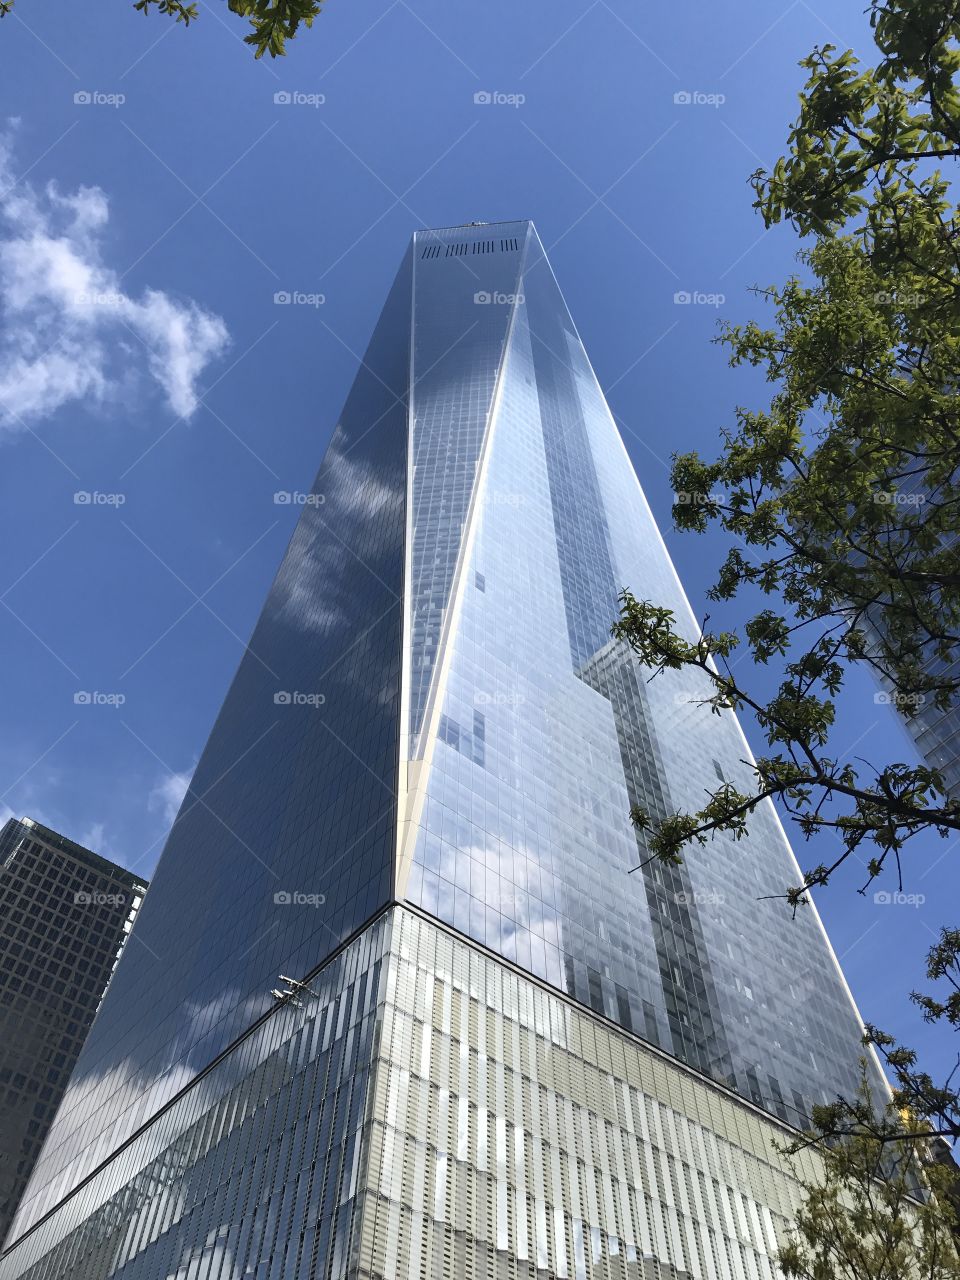 Freedom tower
